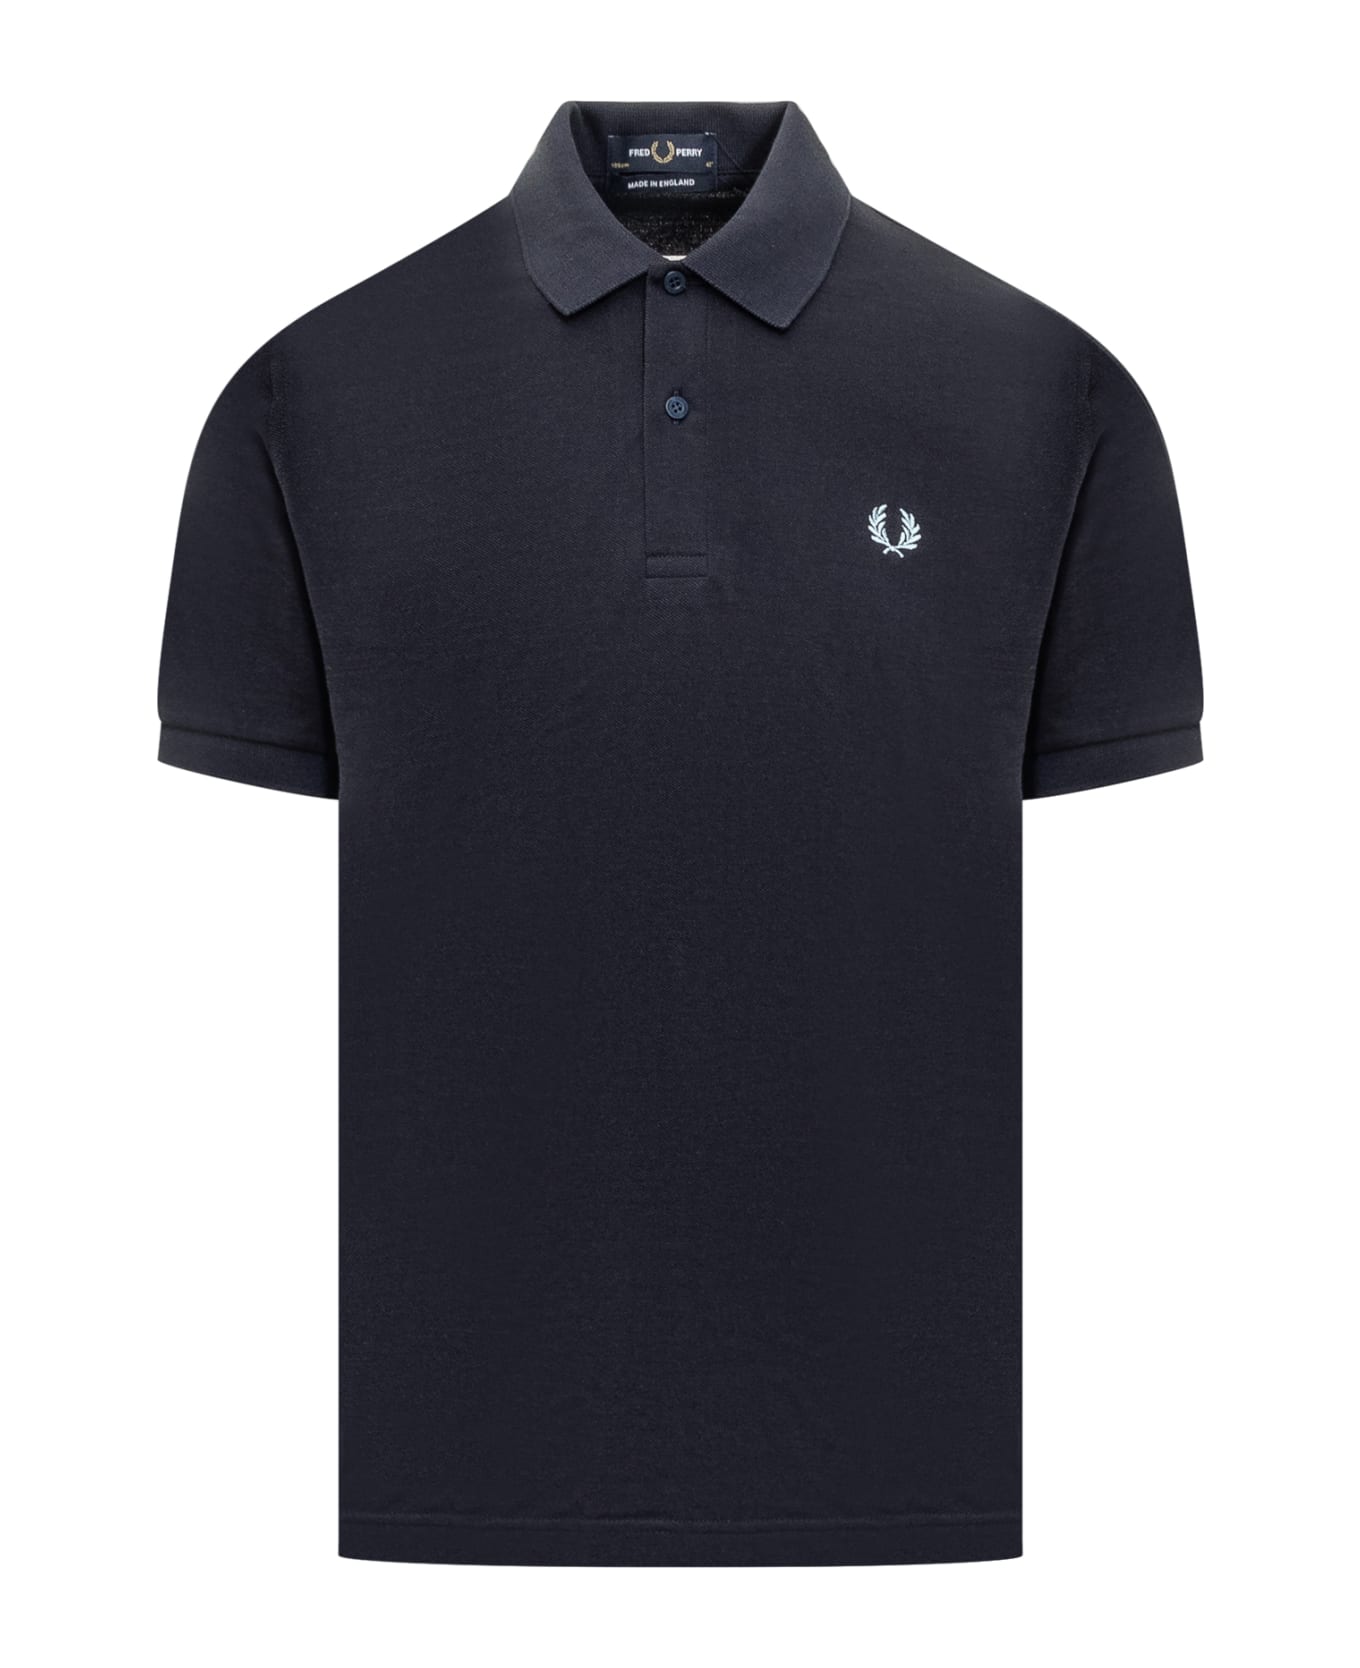 Fred Perry The Original Polo Shirt - NAVY